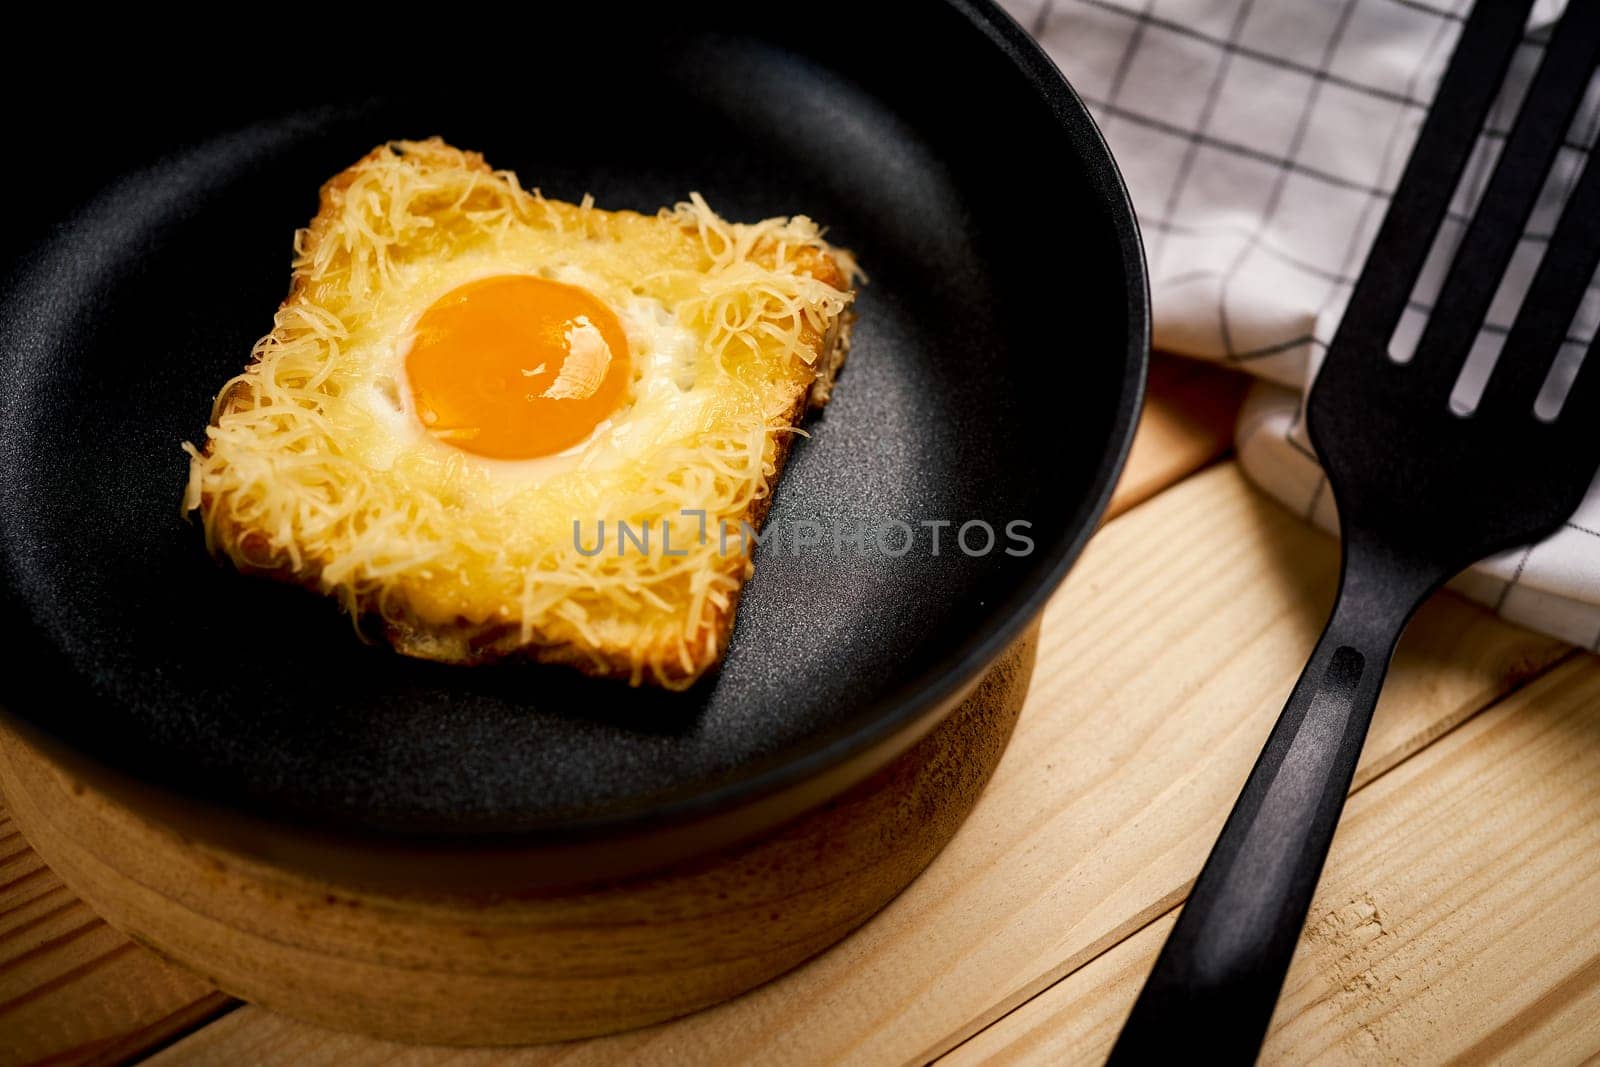 Delicious toast with fried egg and cheese in pan on wooden kitchen table